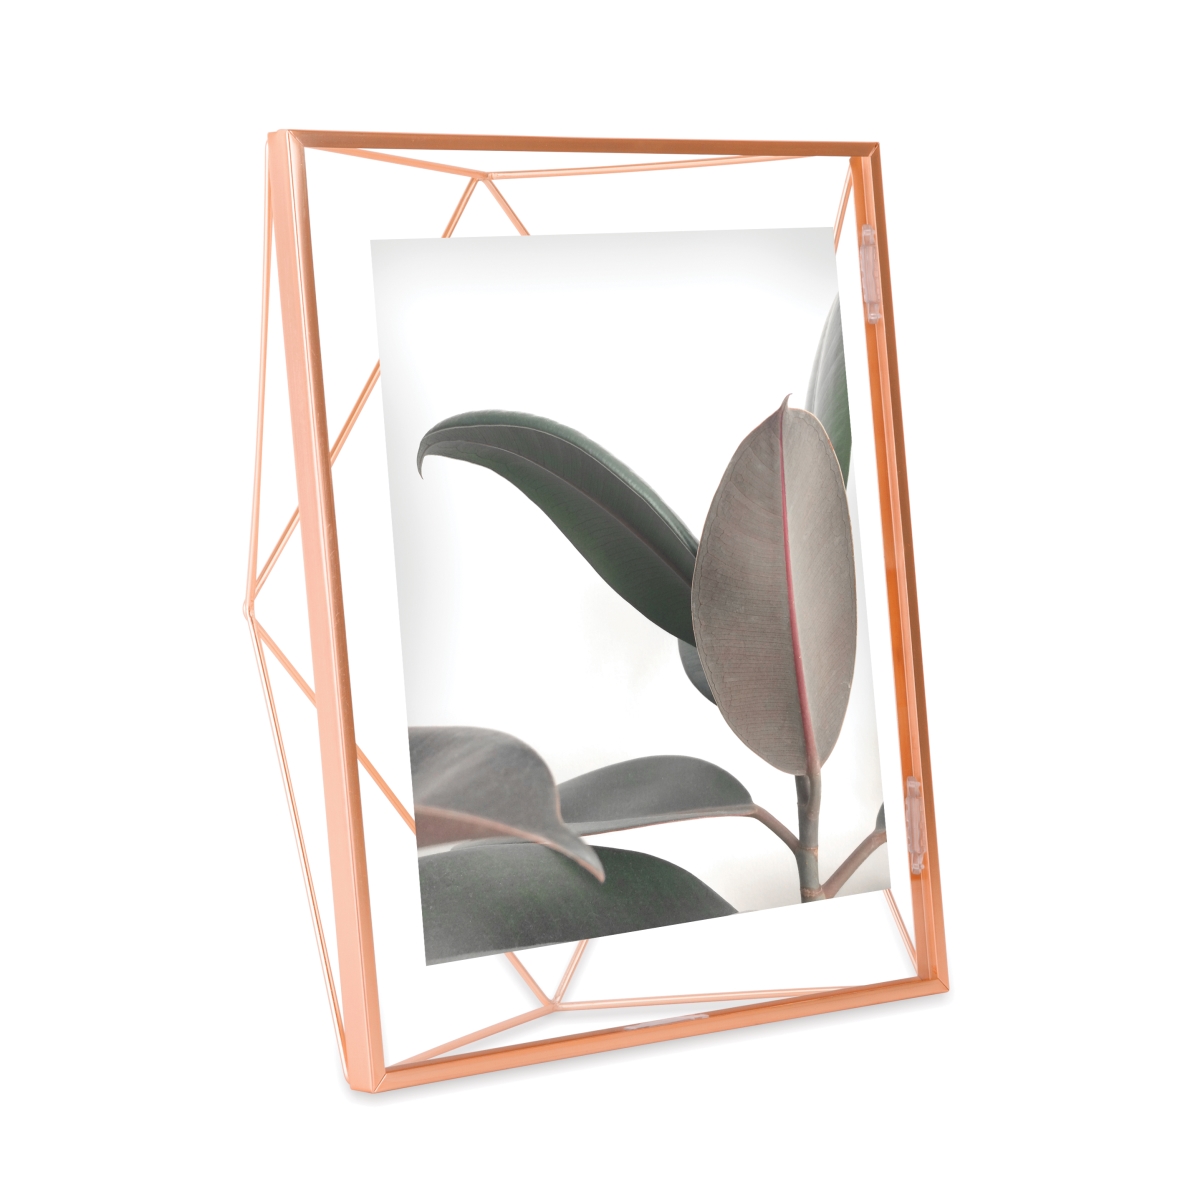 313018-880 8 X 10 In. Prisma Picture Frame Floating Wall Or Desk Photo Display, Metal - Copper